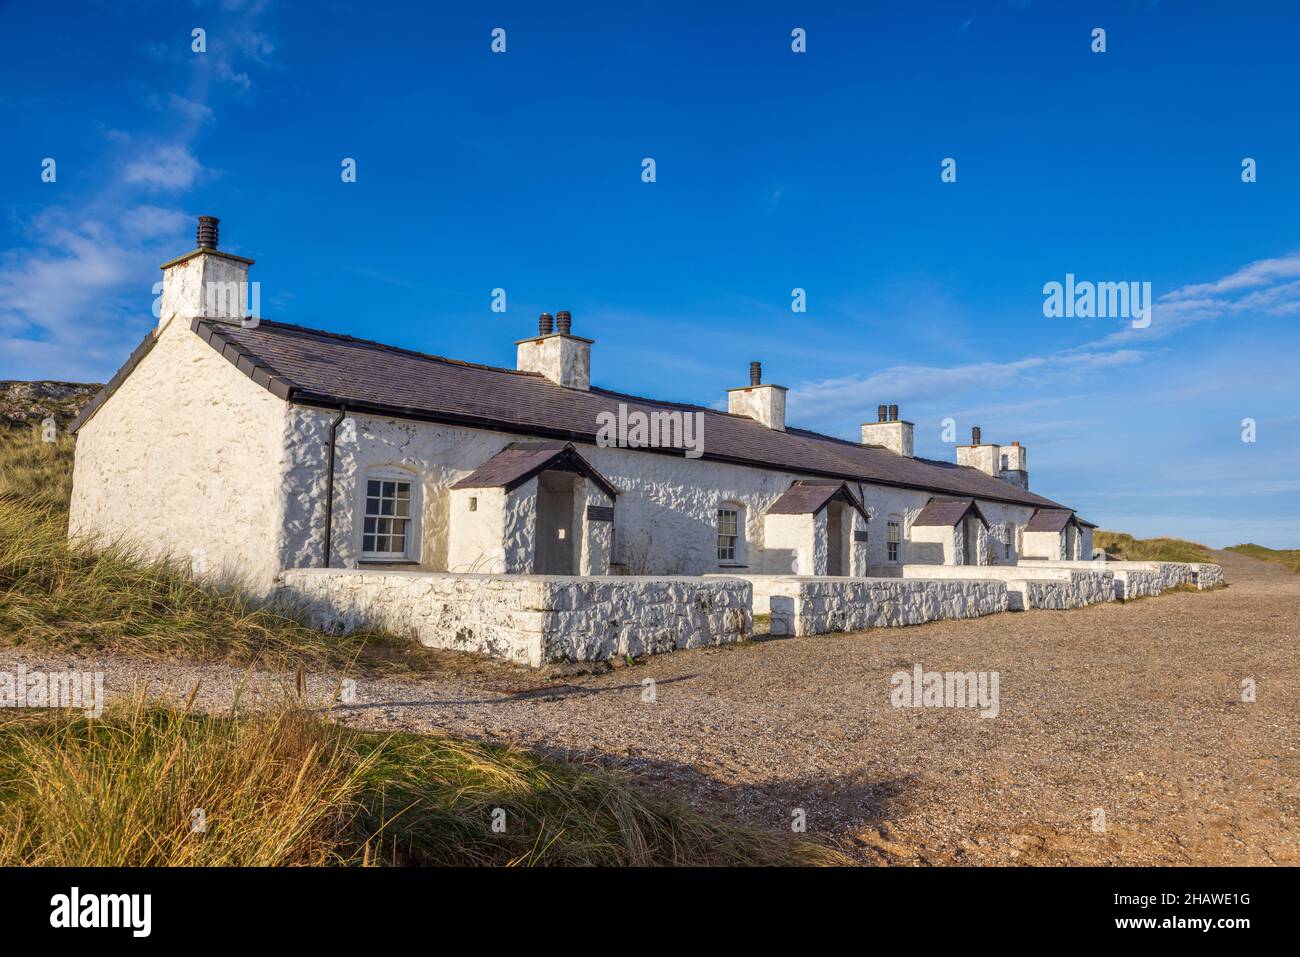 Pilots cottages on Ynys Llanddwyn, Isle of Anglesey, North Wales Stock Photo